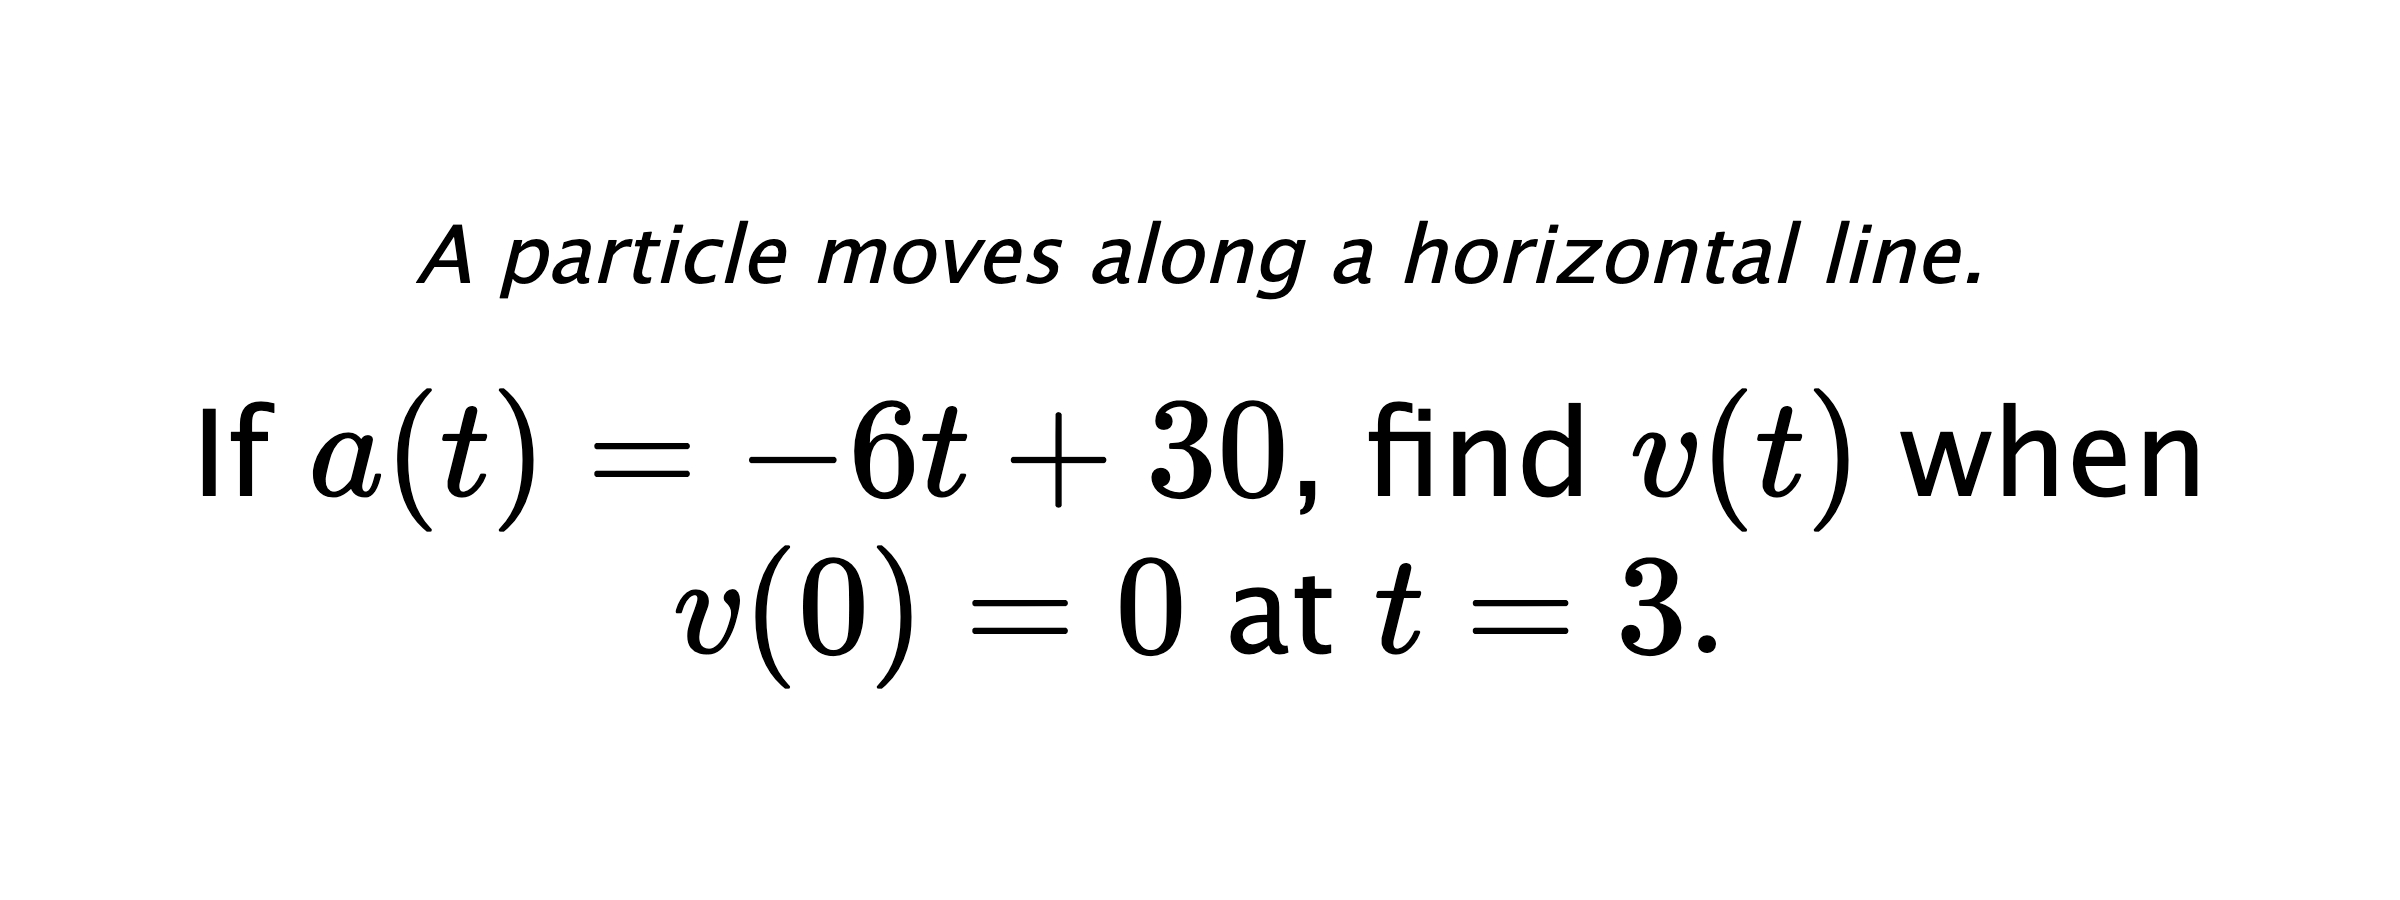 A particle moves along a horizontal line. If $ a(t)=-6t+30 $, find $ v(t) $ when $ v(0)=0 $ at $ t=3 .$